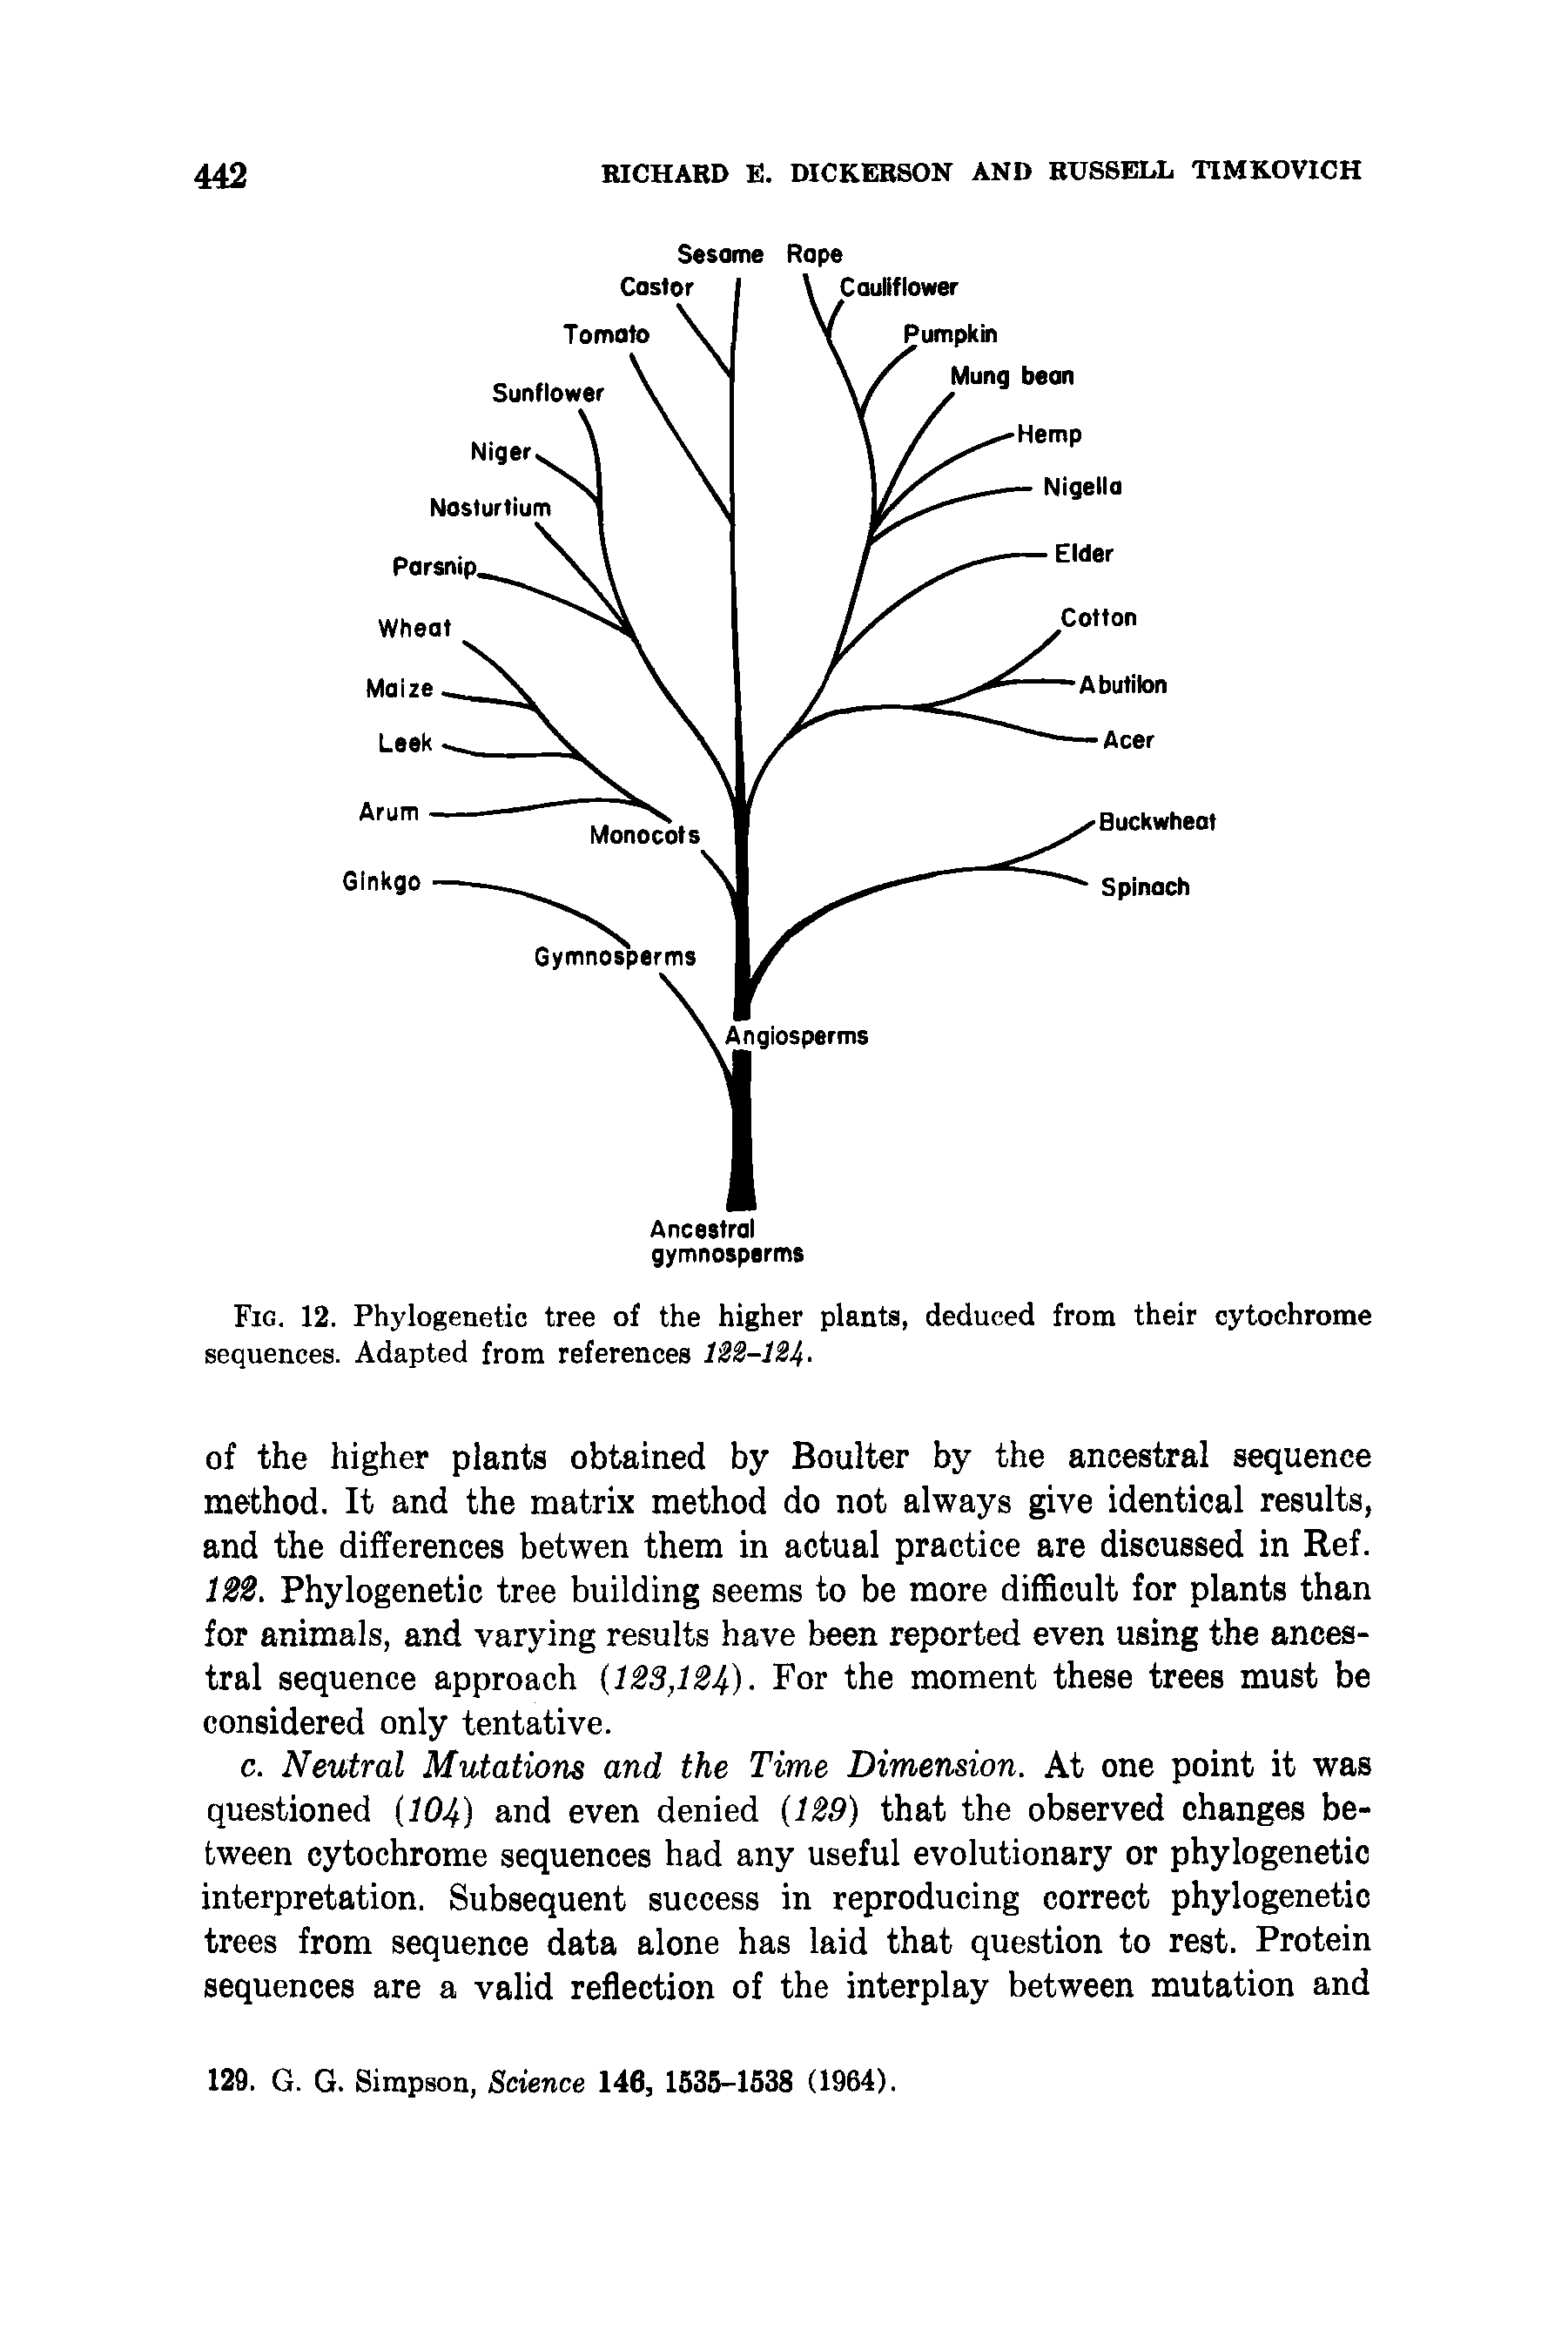 Fig. 12. Phylogenetic tree of the higher plants, deduced from their cytochrome sequences. Adapted from references lii-lH.